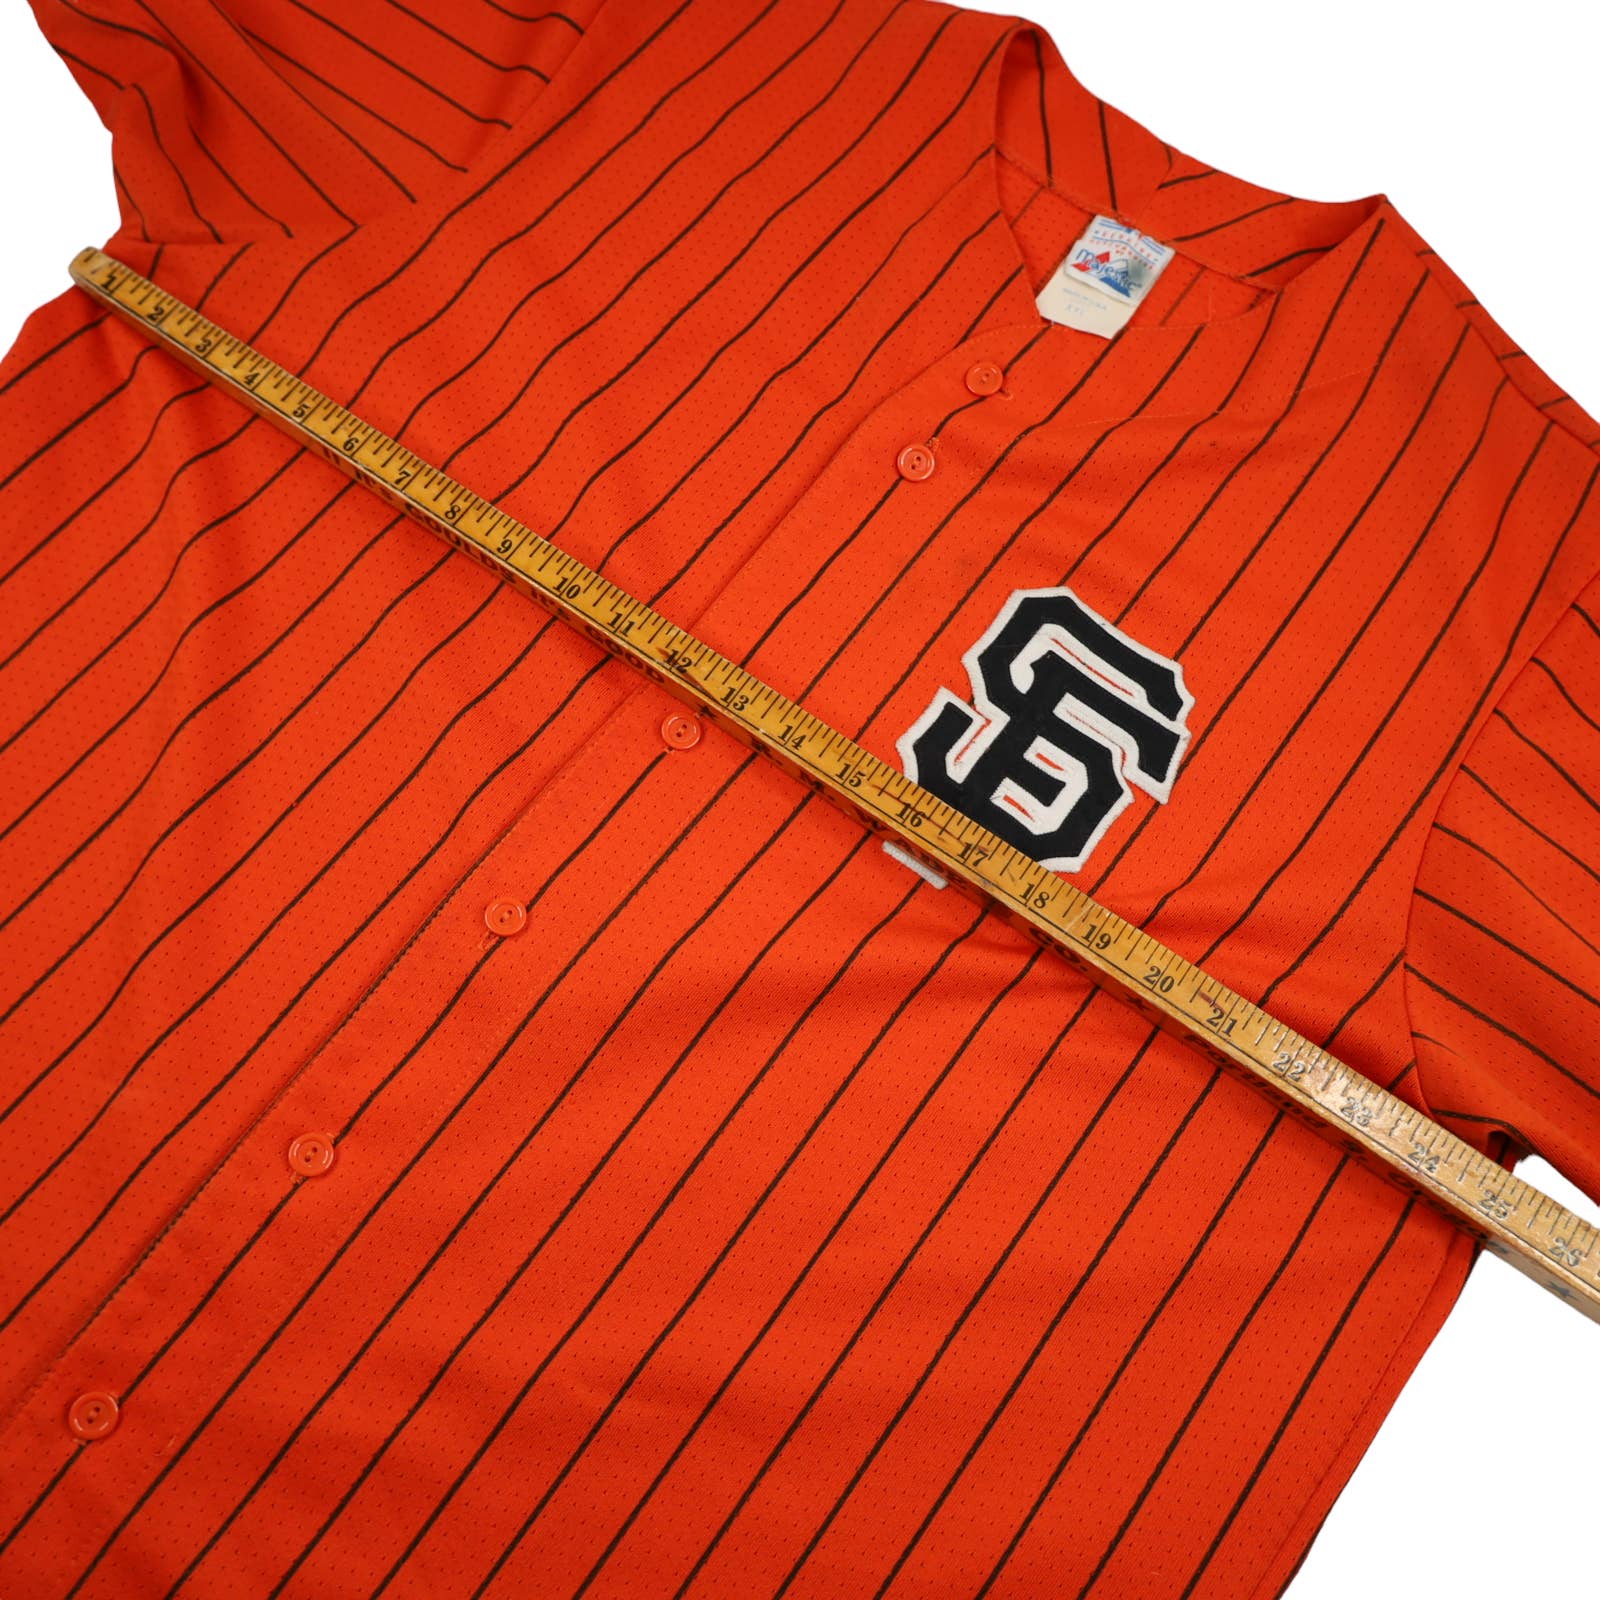 San Francisco Giants Boys Jersey Free Shipping - The Vintage Twin